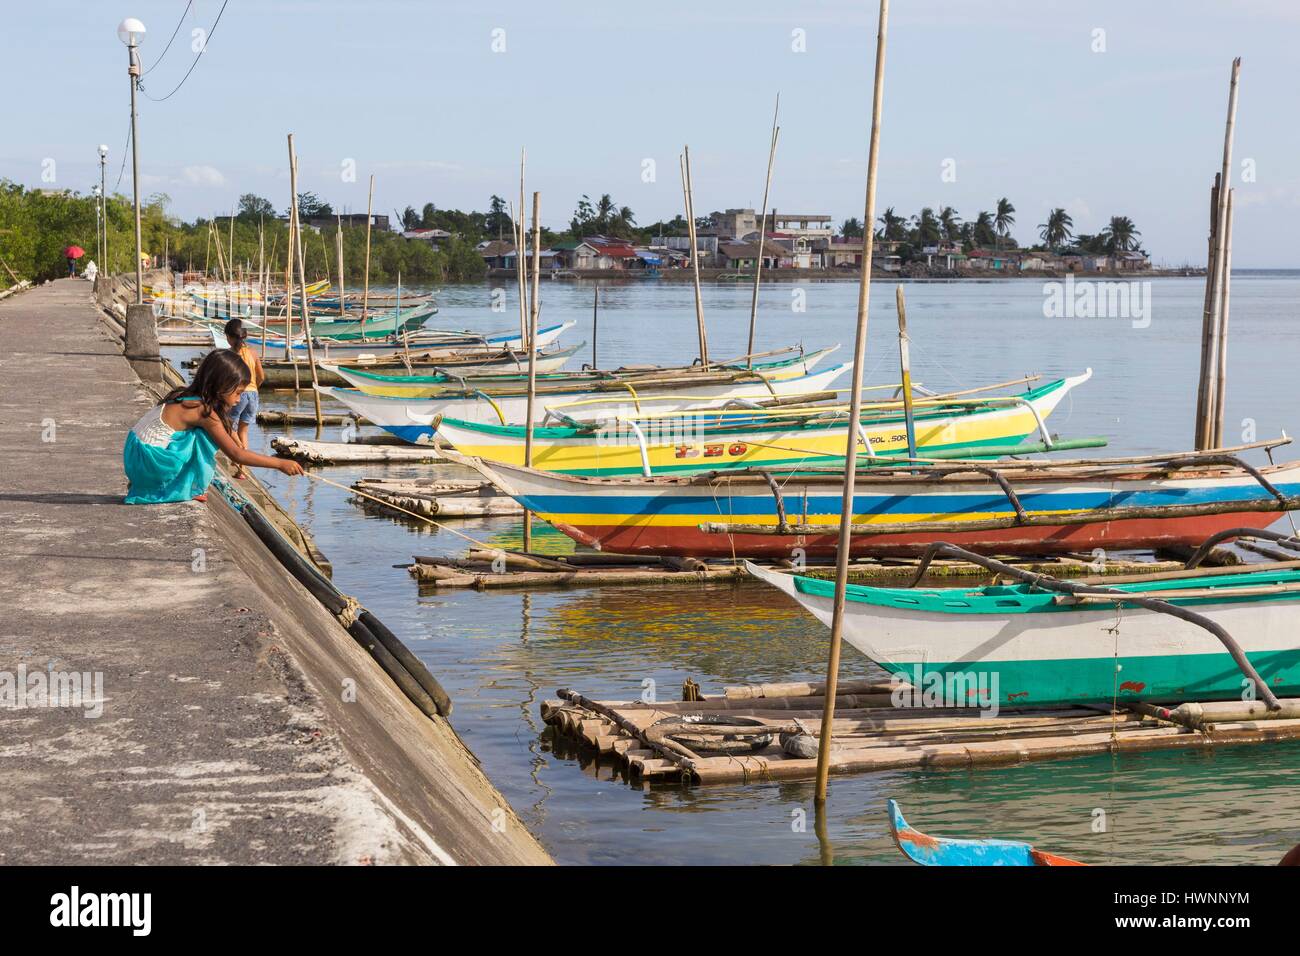 Philippines, Luzon, Sorsogon Province, Donsol, fishing boats along the jetty Stock Photo